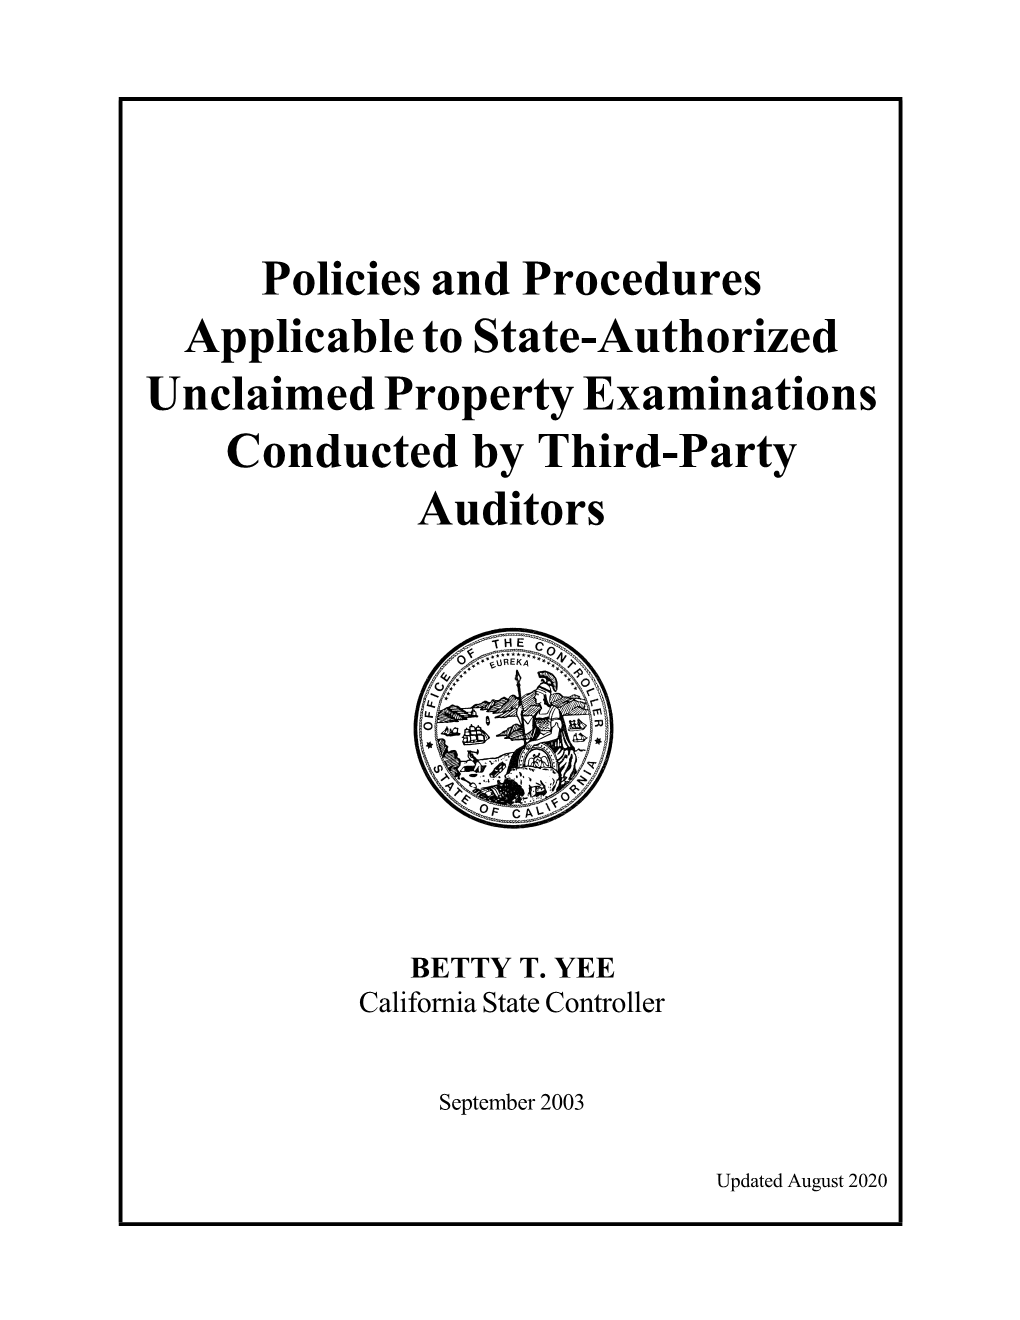 Policies and Procedures Applicable to State-Authorized Unclaimed Property Examinations Conducted by Third-Party Auditors